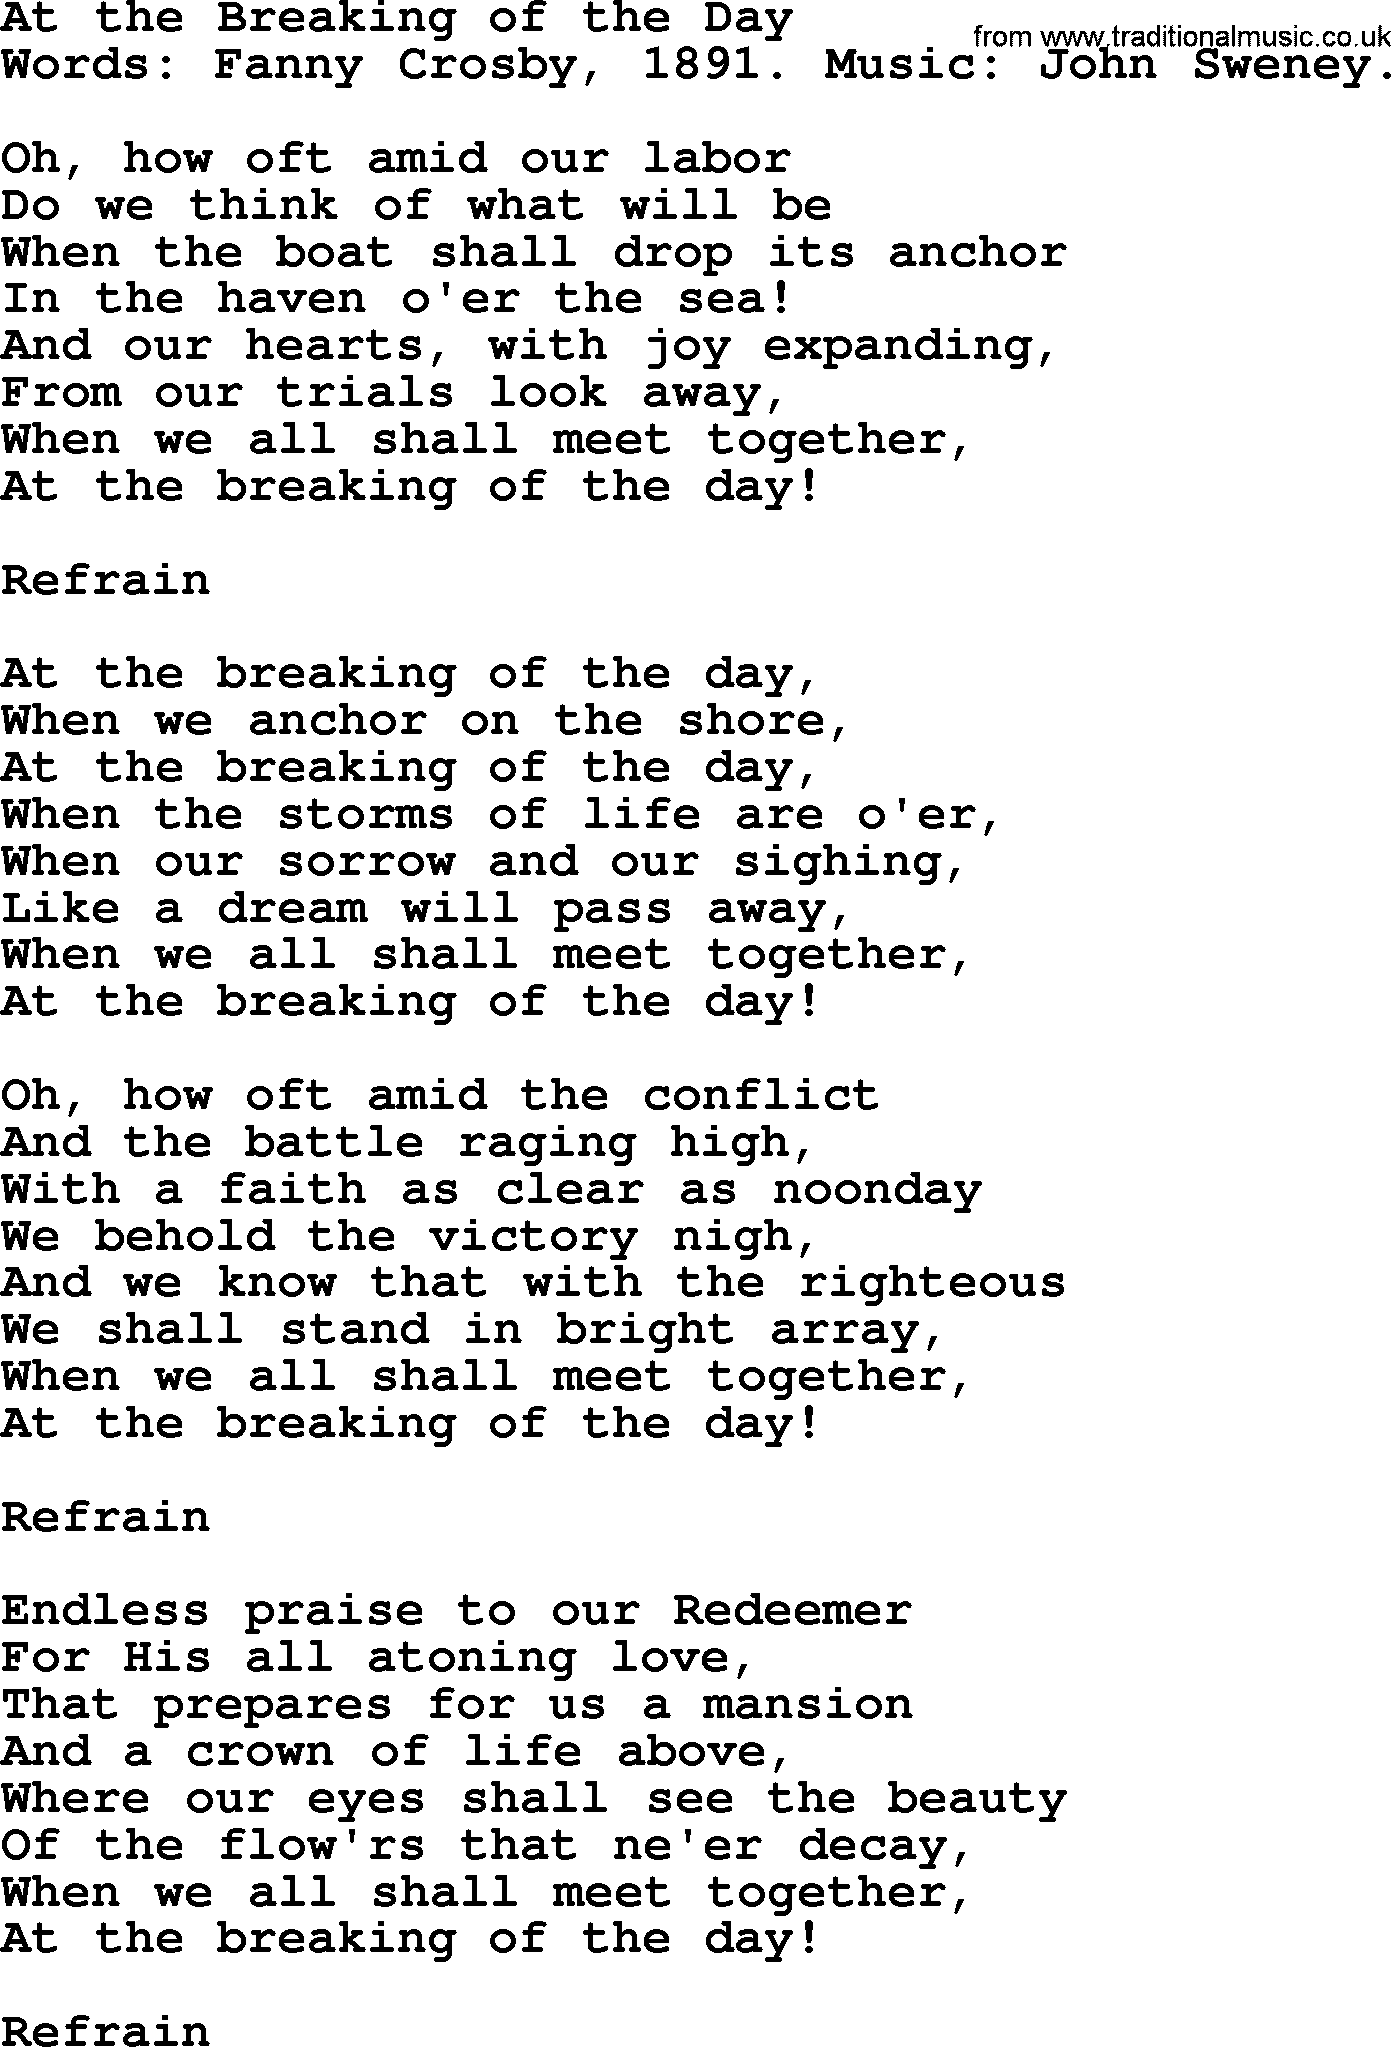 Fanny Crosby song: At The Breaking Of The Day, lyrics